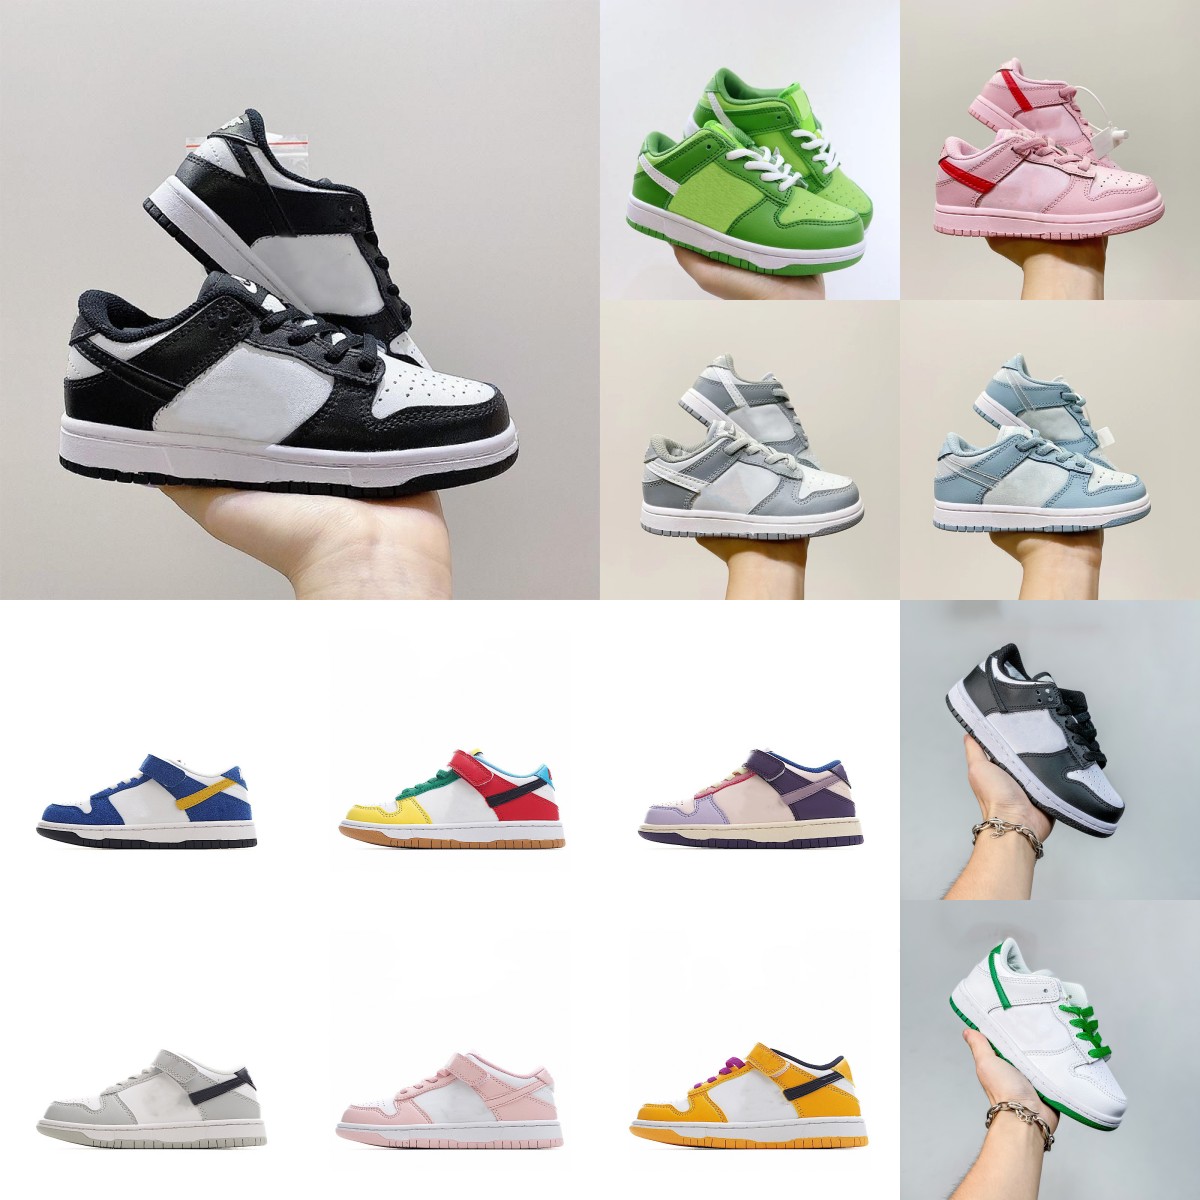 

2023 Shoes Kids low dunks boys Sports Girls baby sneakers designer trainers Running basketball shoe chunky black kid youth new toddler infants triple pink size 24-35, As picture